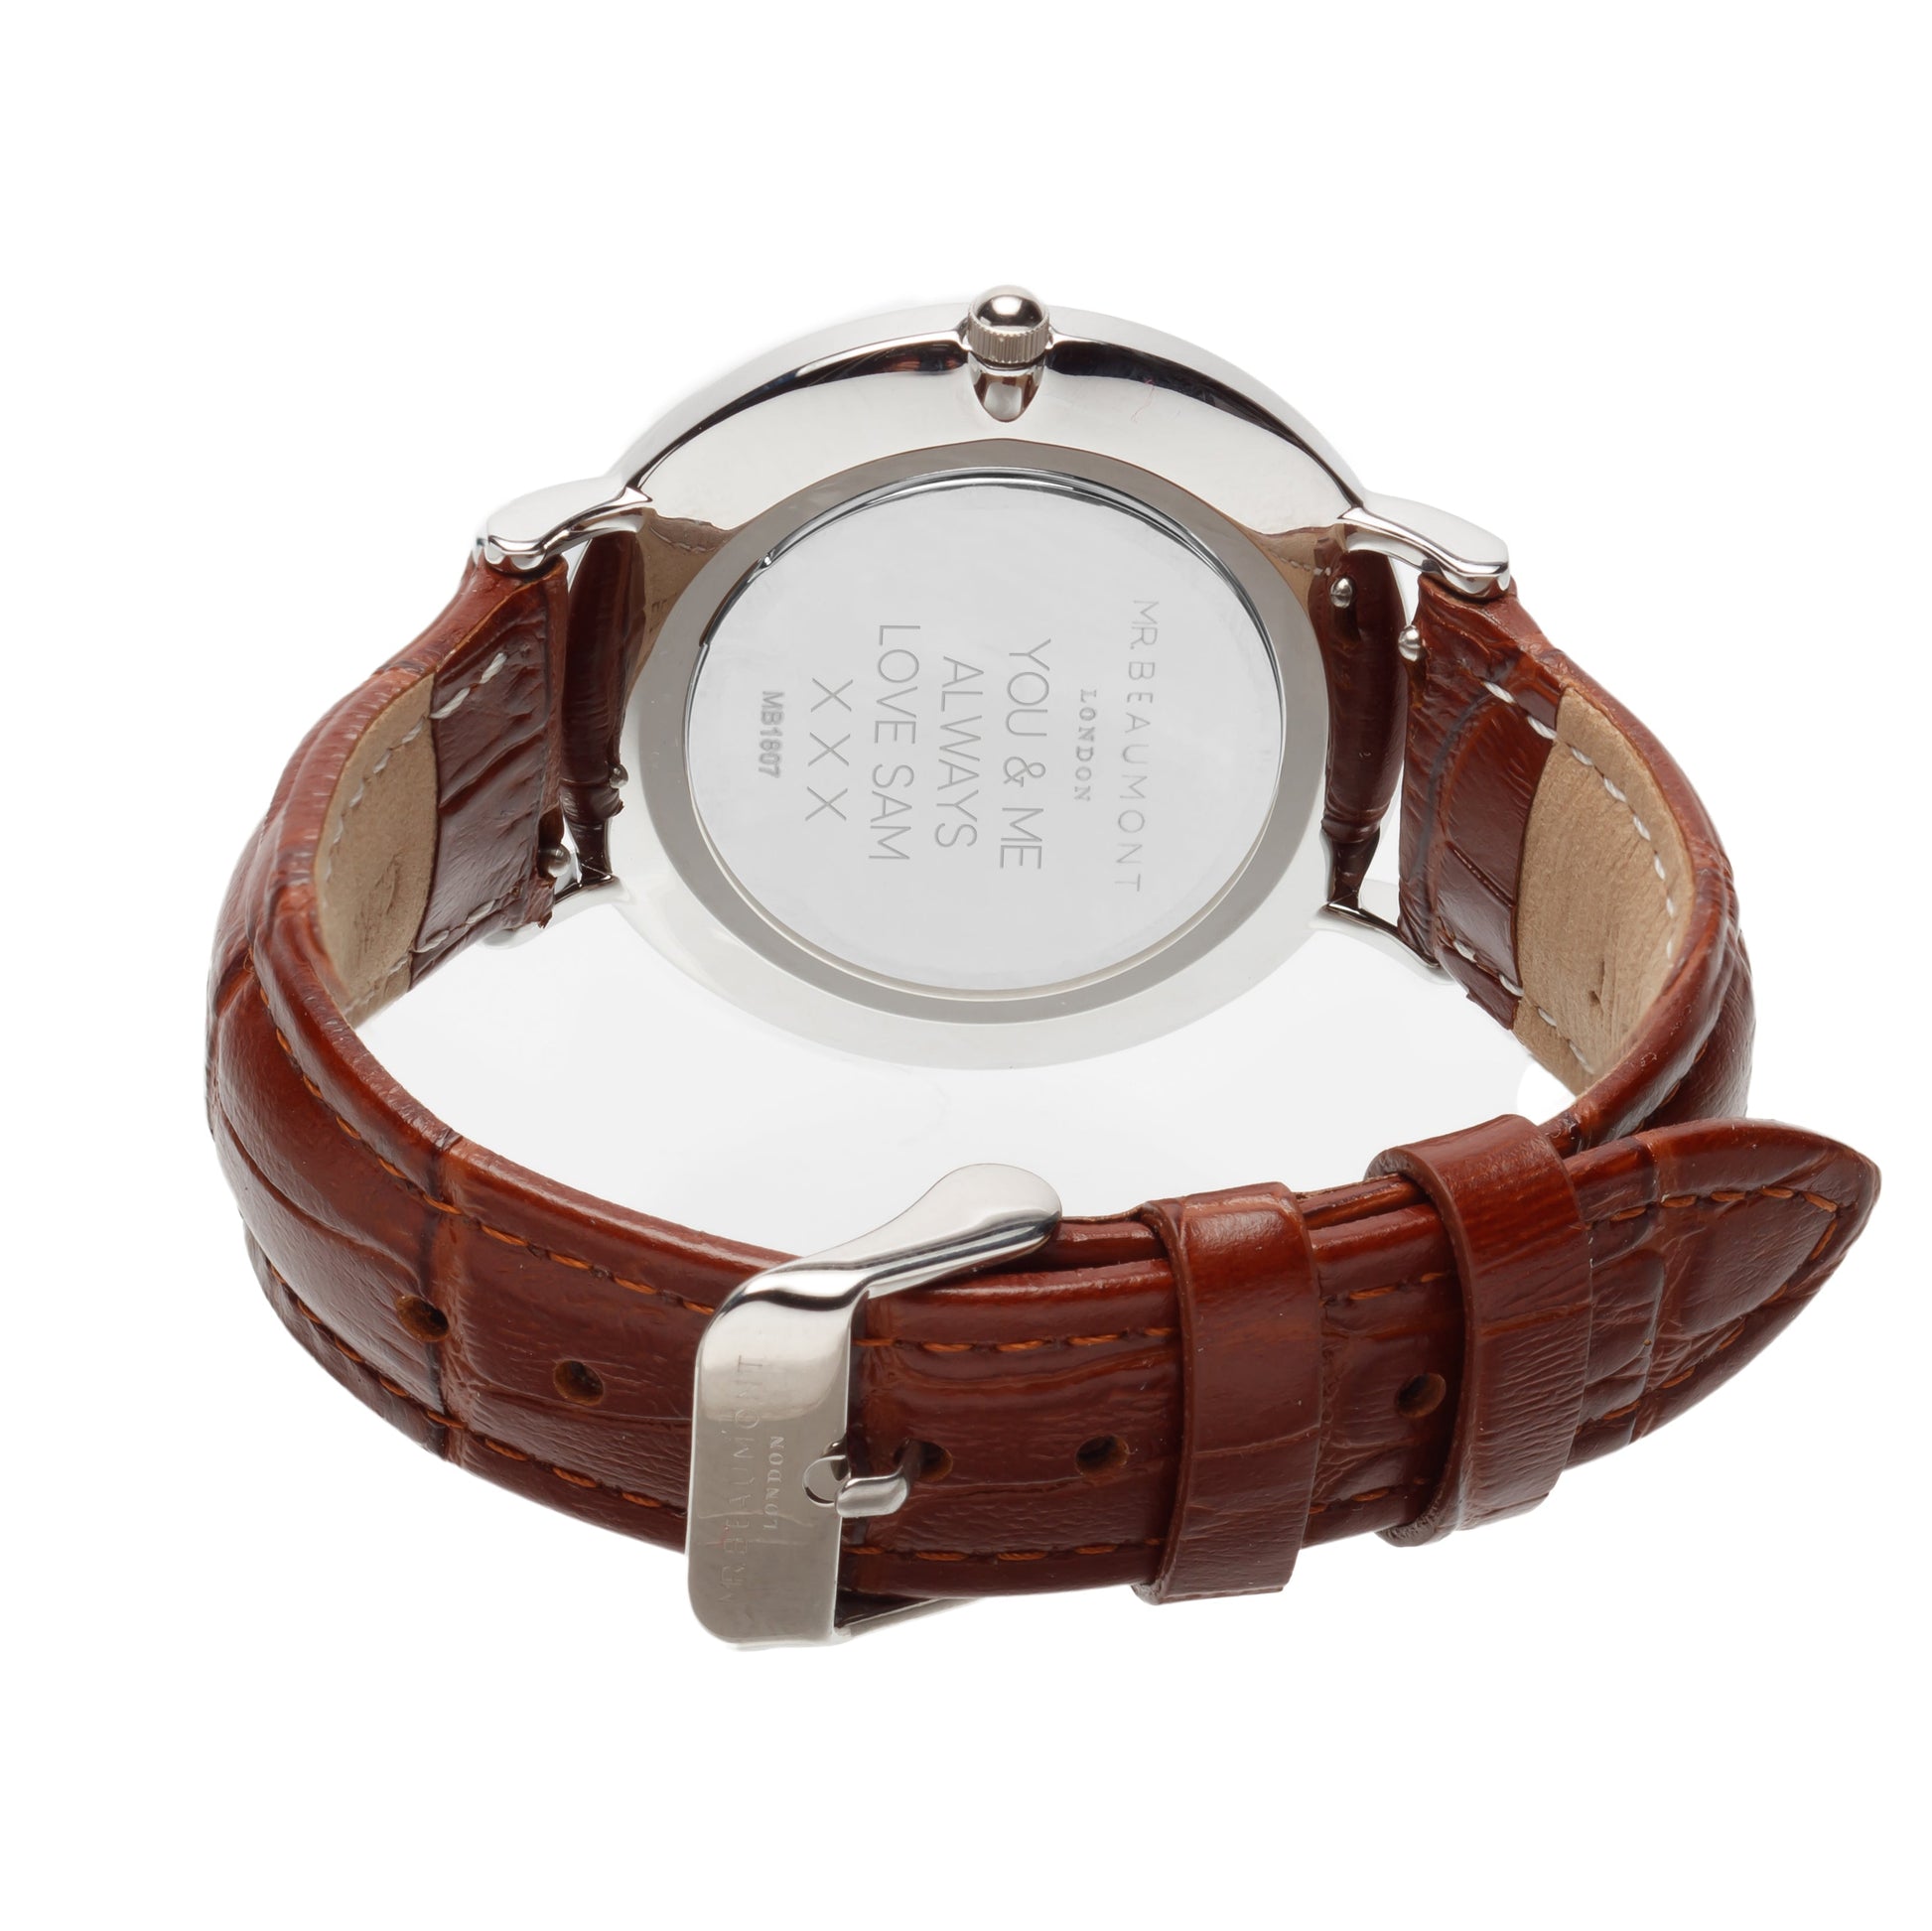 Personalized Men's Watches - Mr Beaumont Men's Personalized Watch in Vintage Brown 